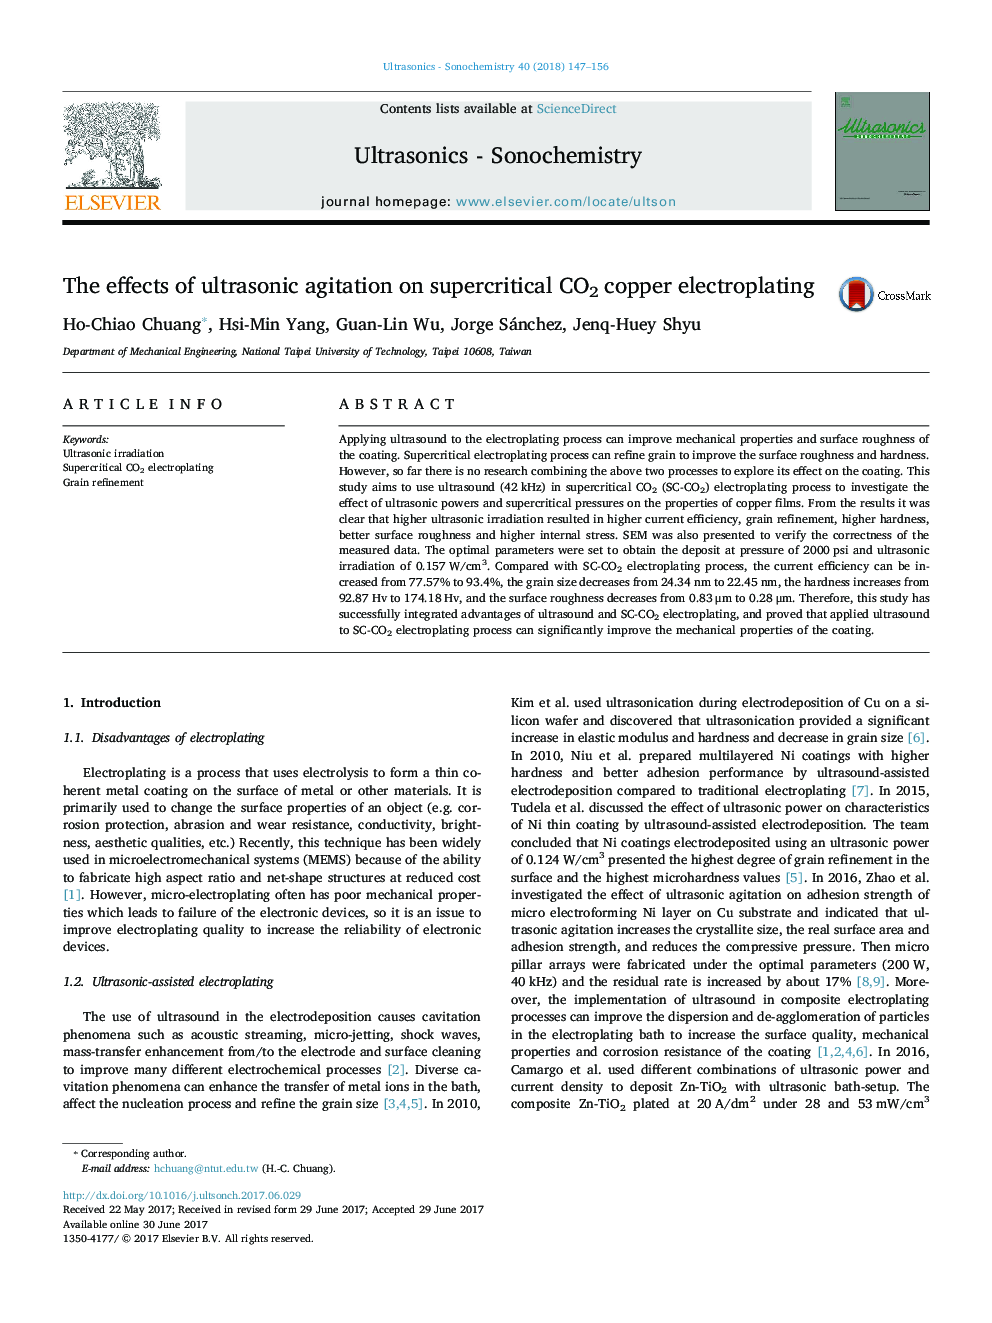 The effects of ultrasonic agitation on supercritical CO2 copper electroplating